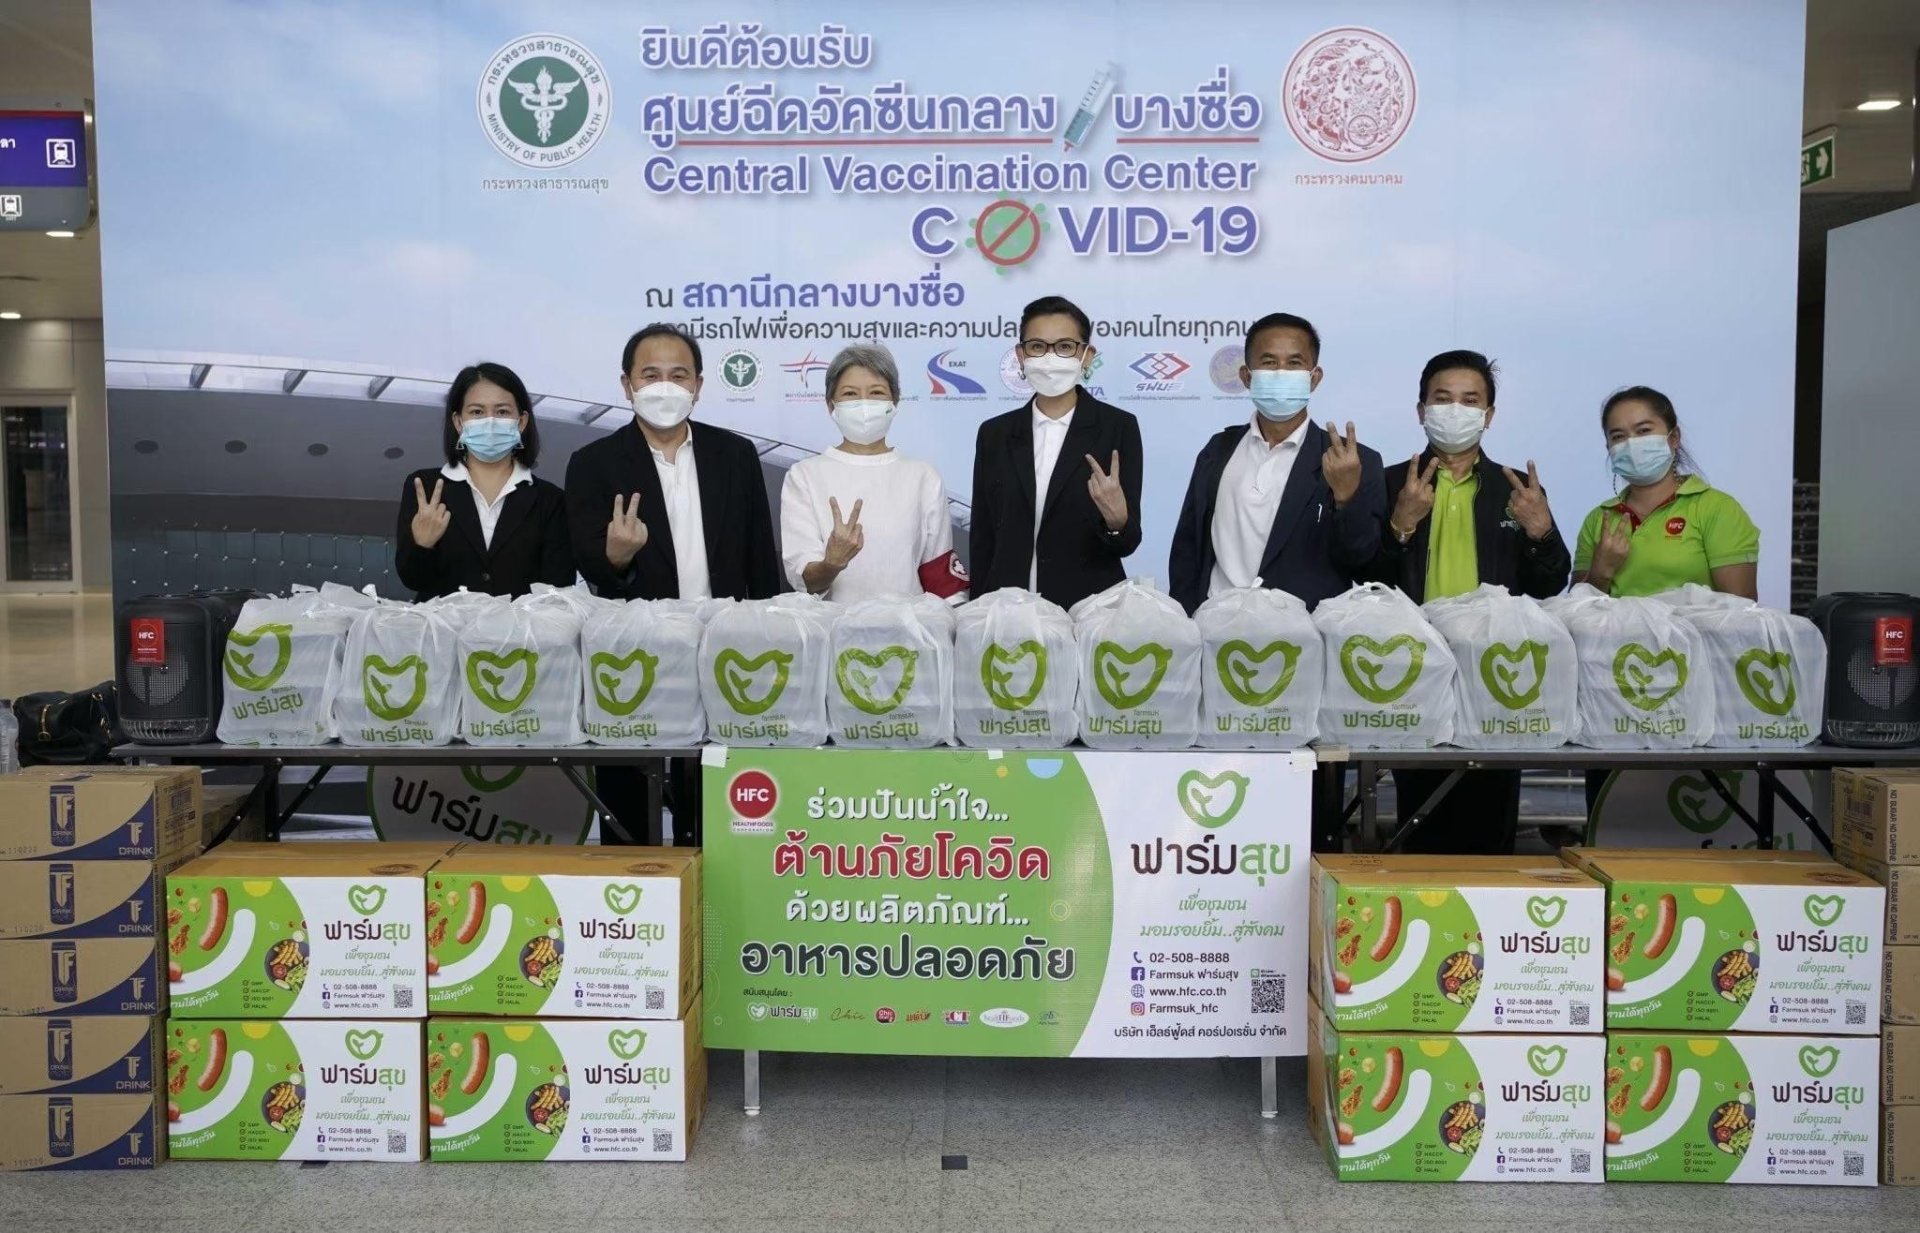 HFC joins the initiative to spread happiness among medical staff at Bang Sue's Central Vaccination Center for COVID-19.